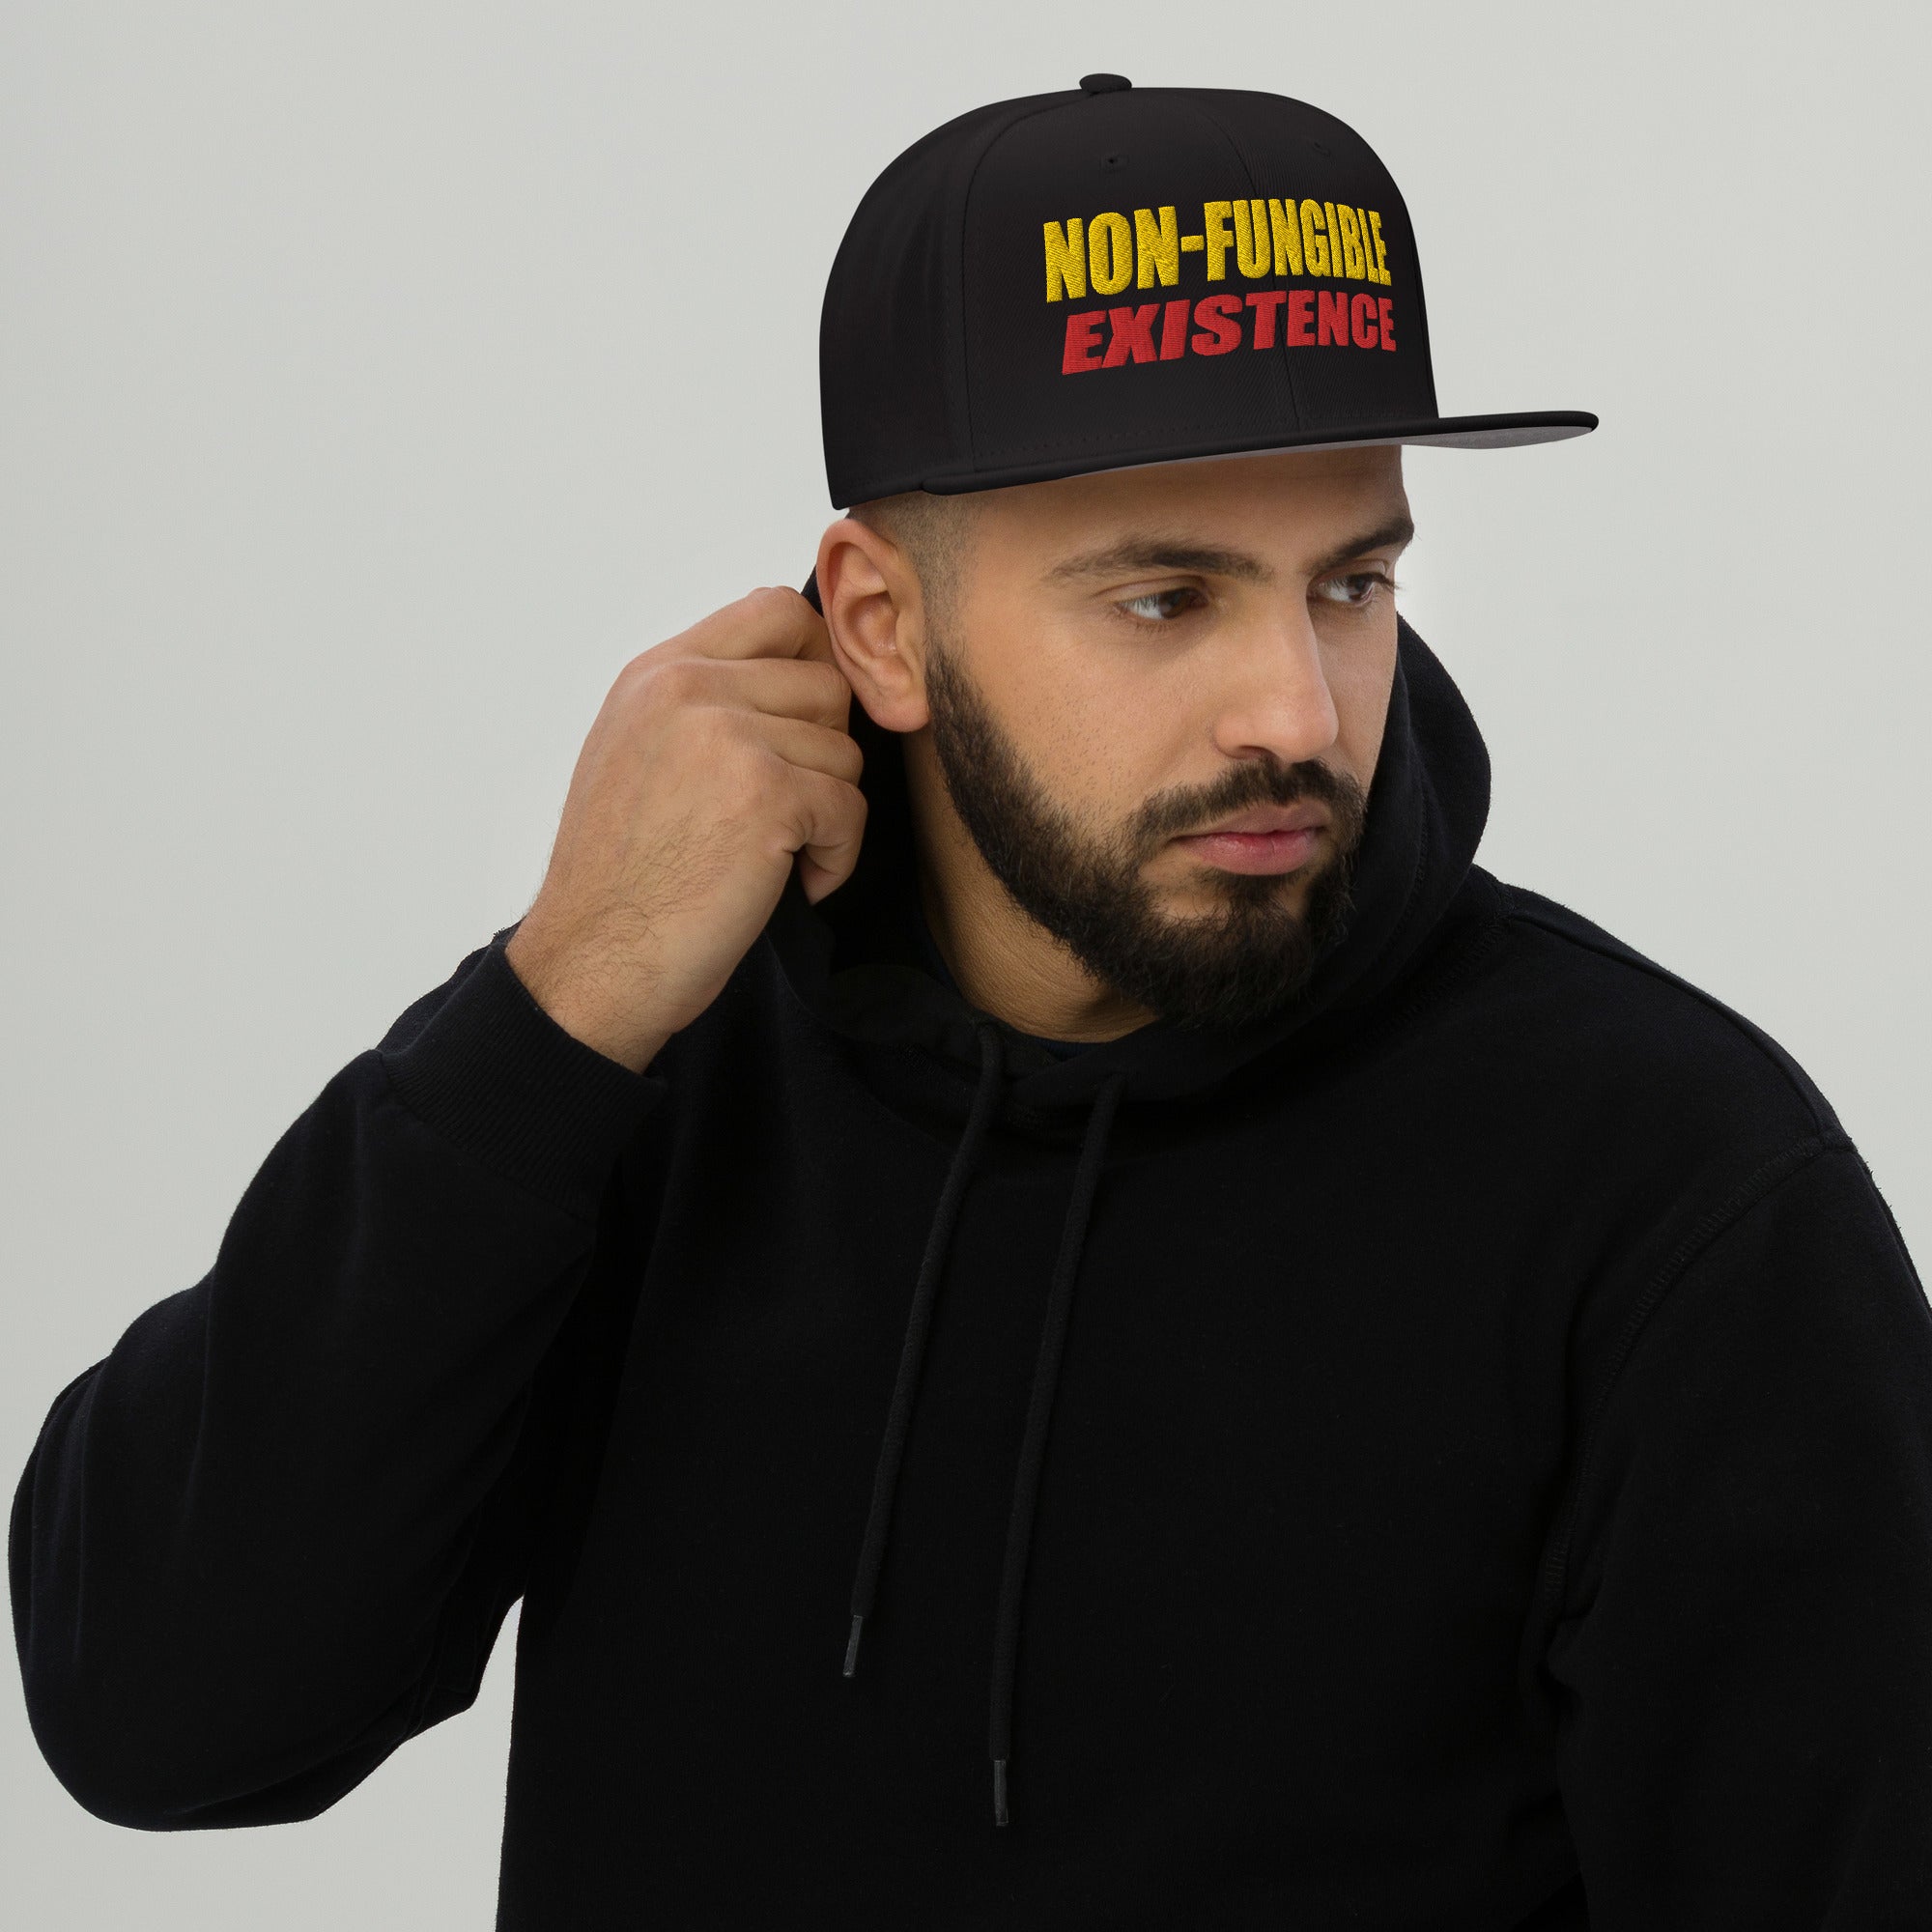 NFT Non-Fungible Existence is the world of Crypto and Bitcoin Flat Bill Cap Snapback Hat